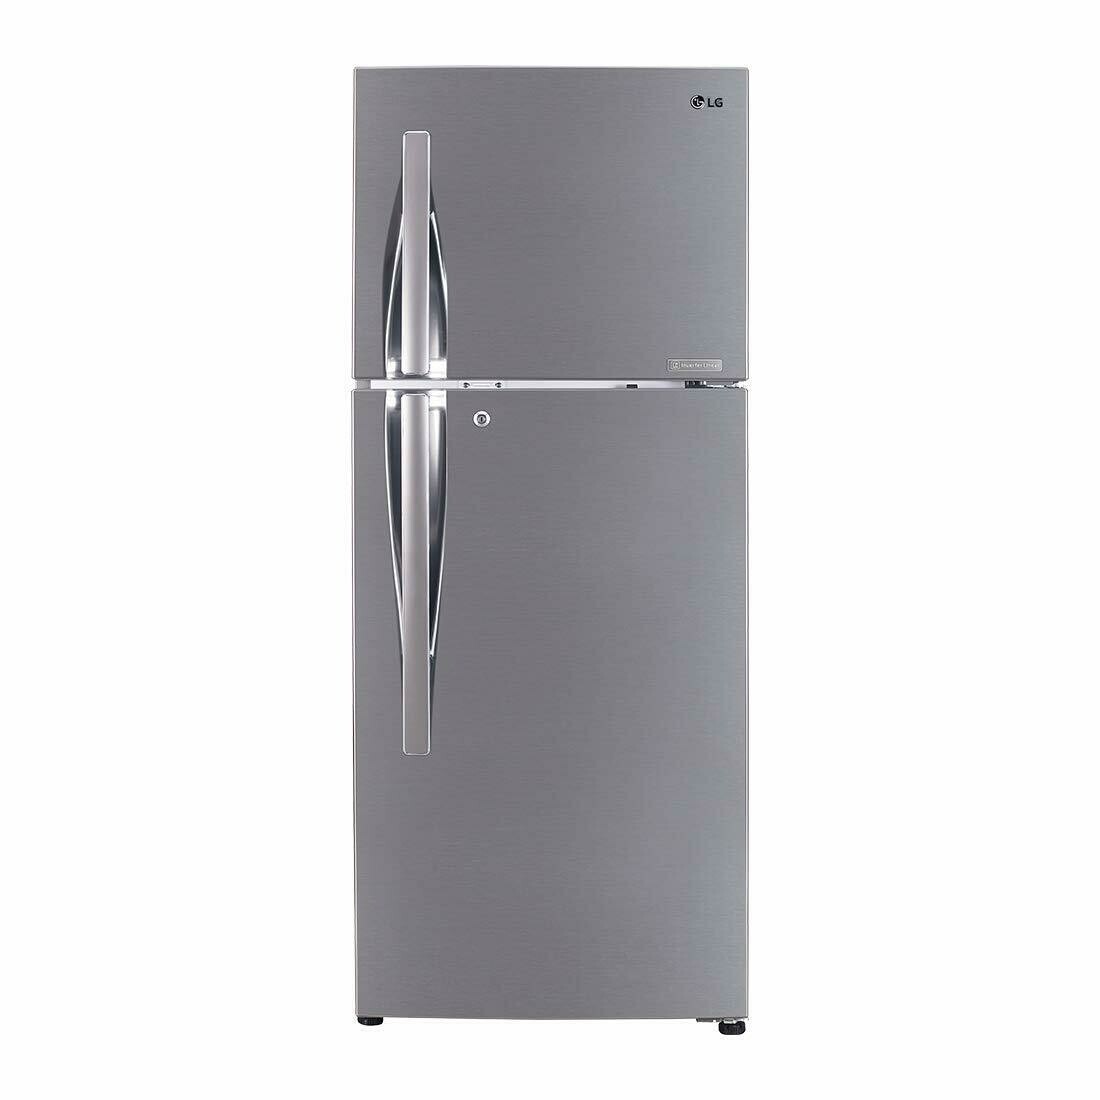 LG 260 L 2 Star Smart Inverter Frost-Free Double-Door Refrigerator (GL-T292RPZY, Shiny Steel, Convertible)